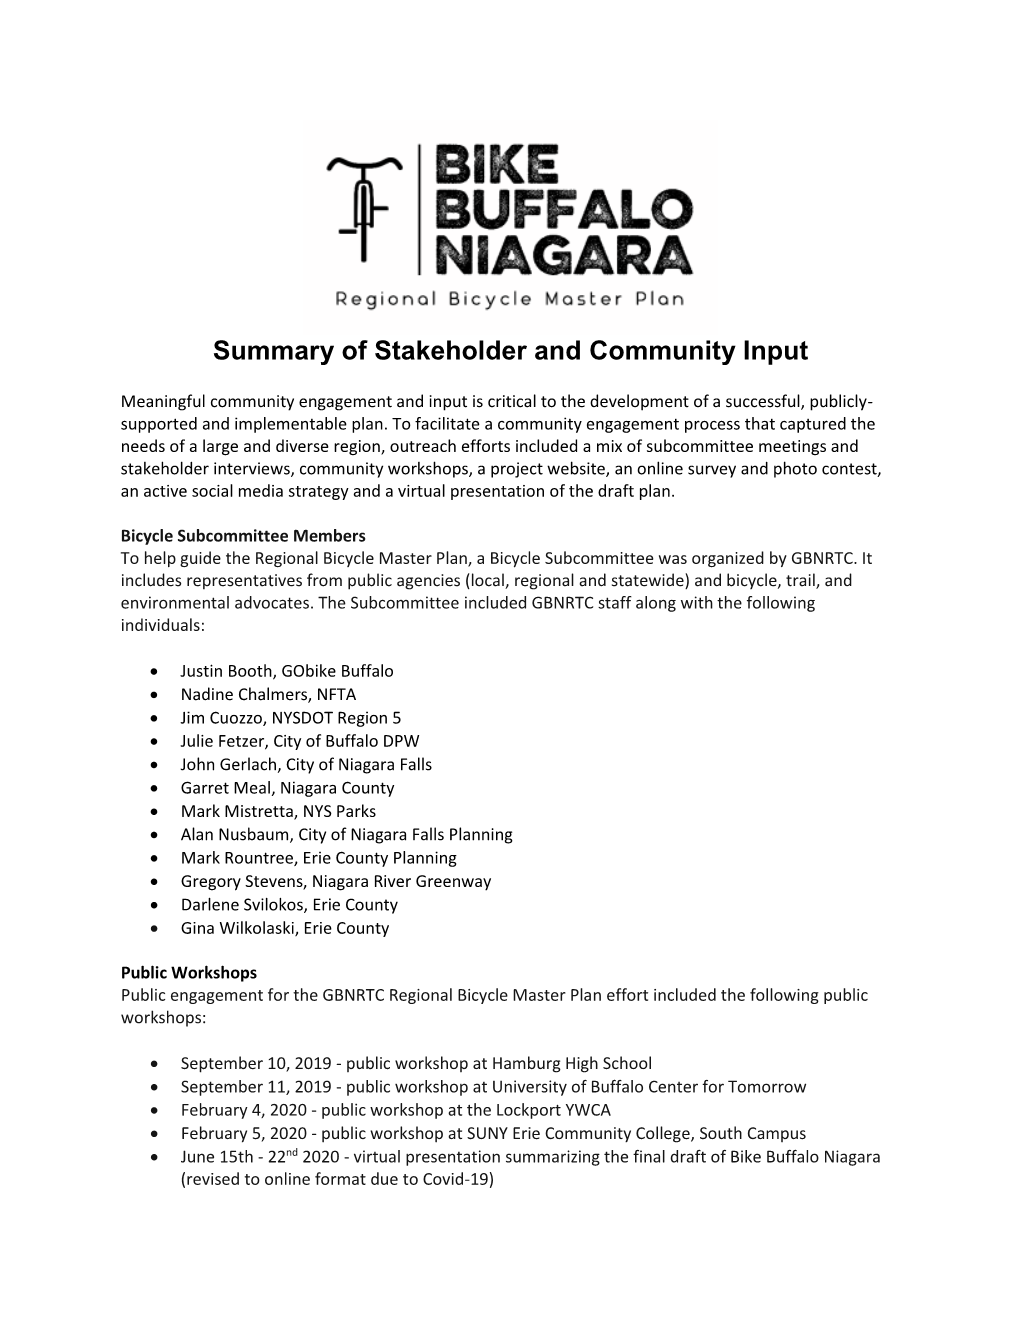 Summary of Stakeholder and Community Input